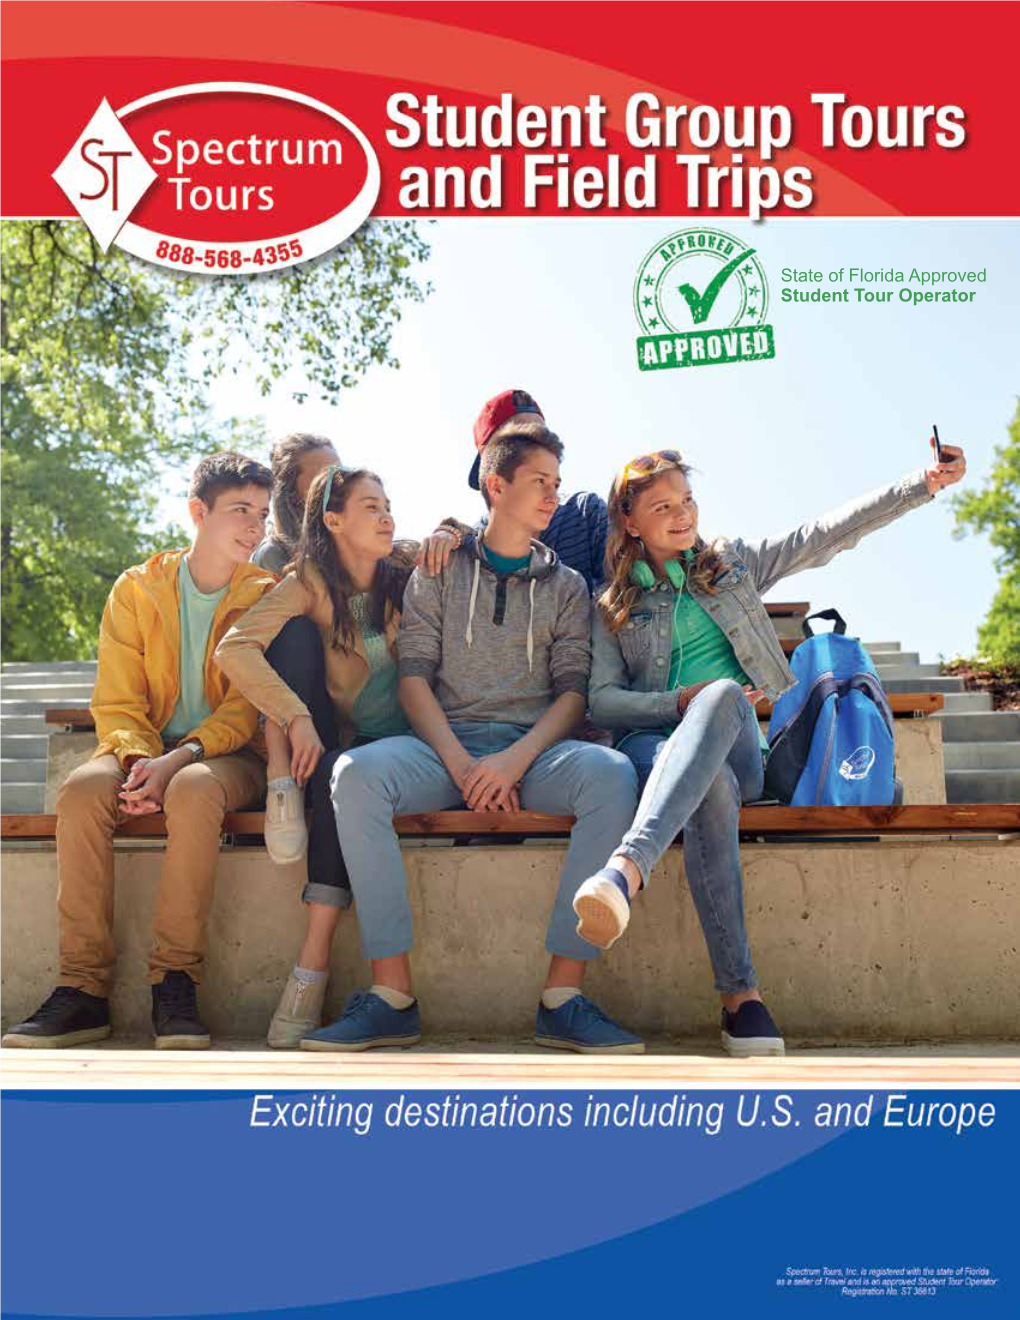 State of Florida Approved Student Tour Operator